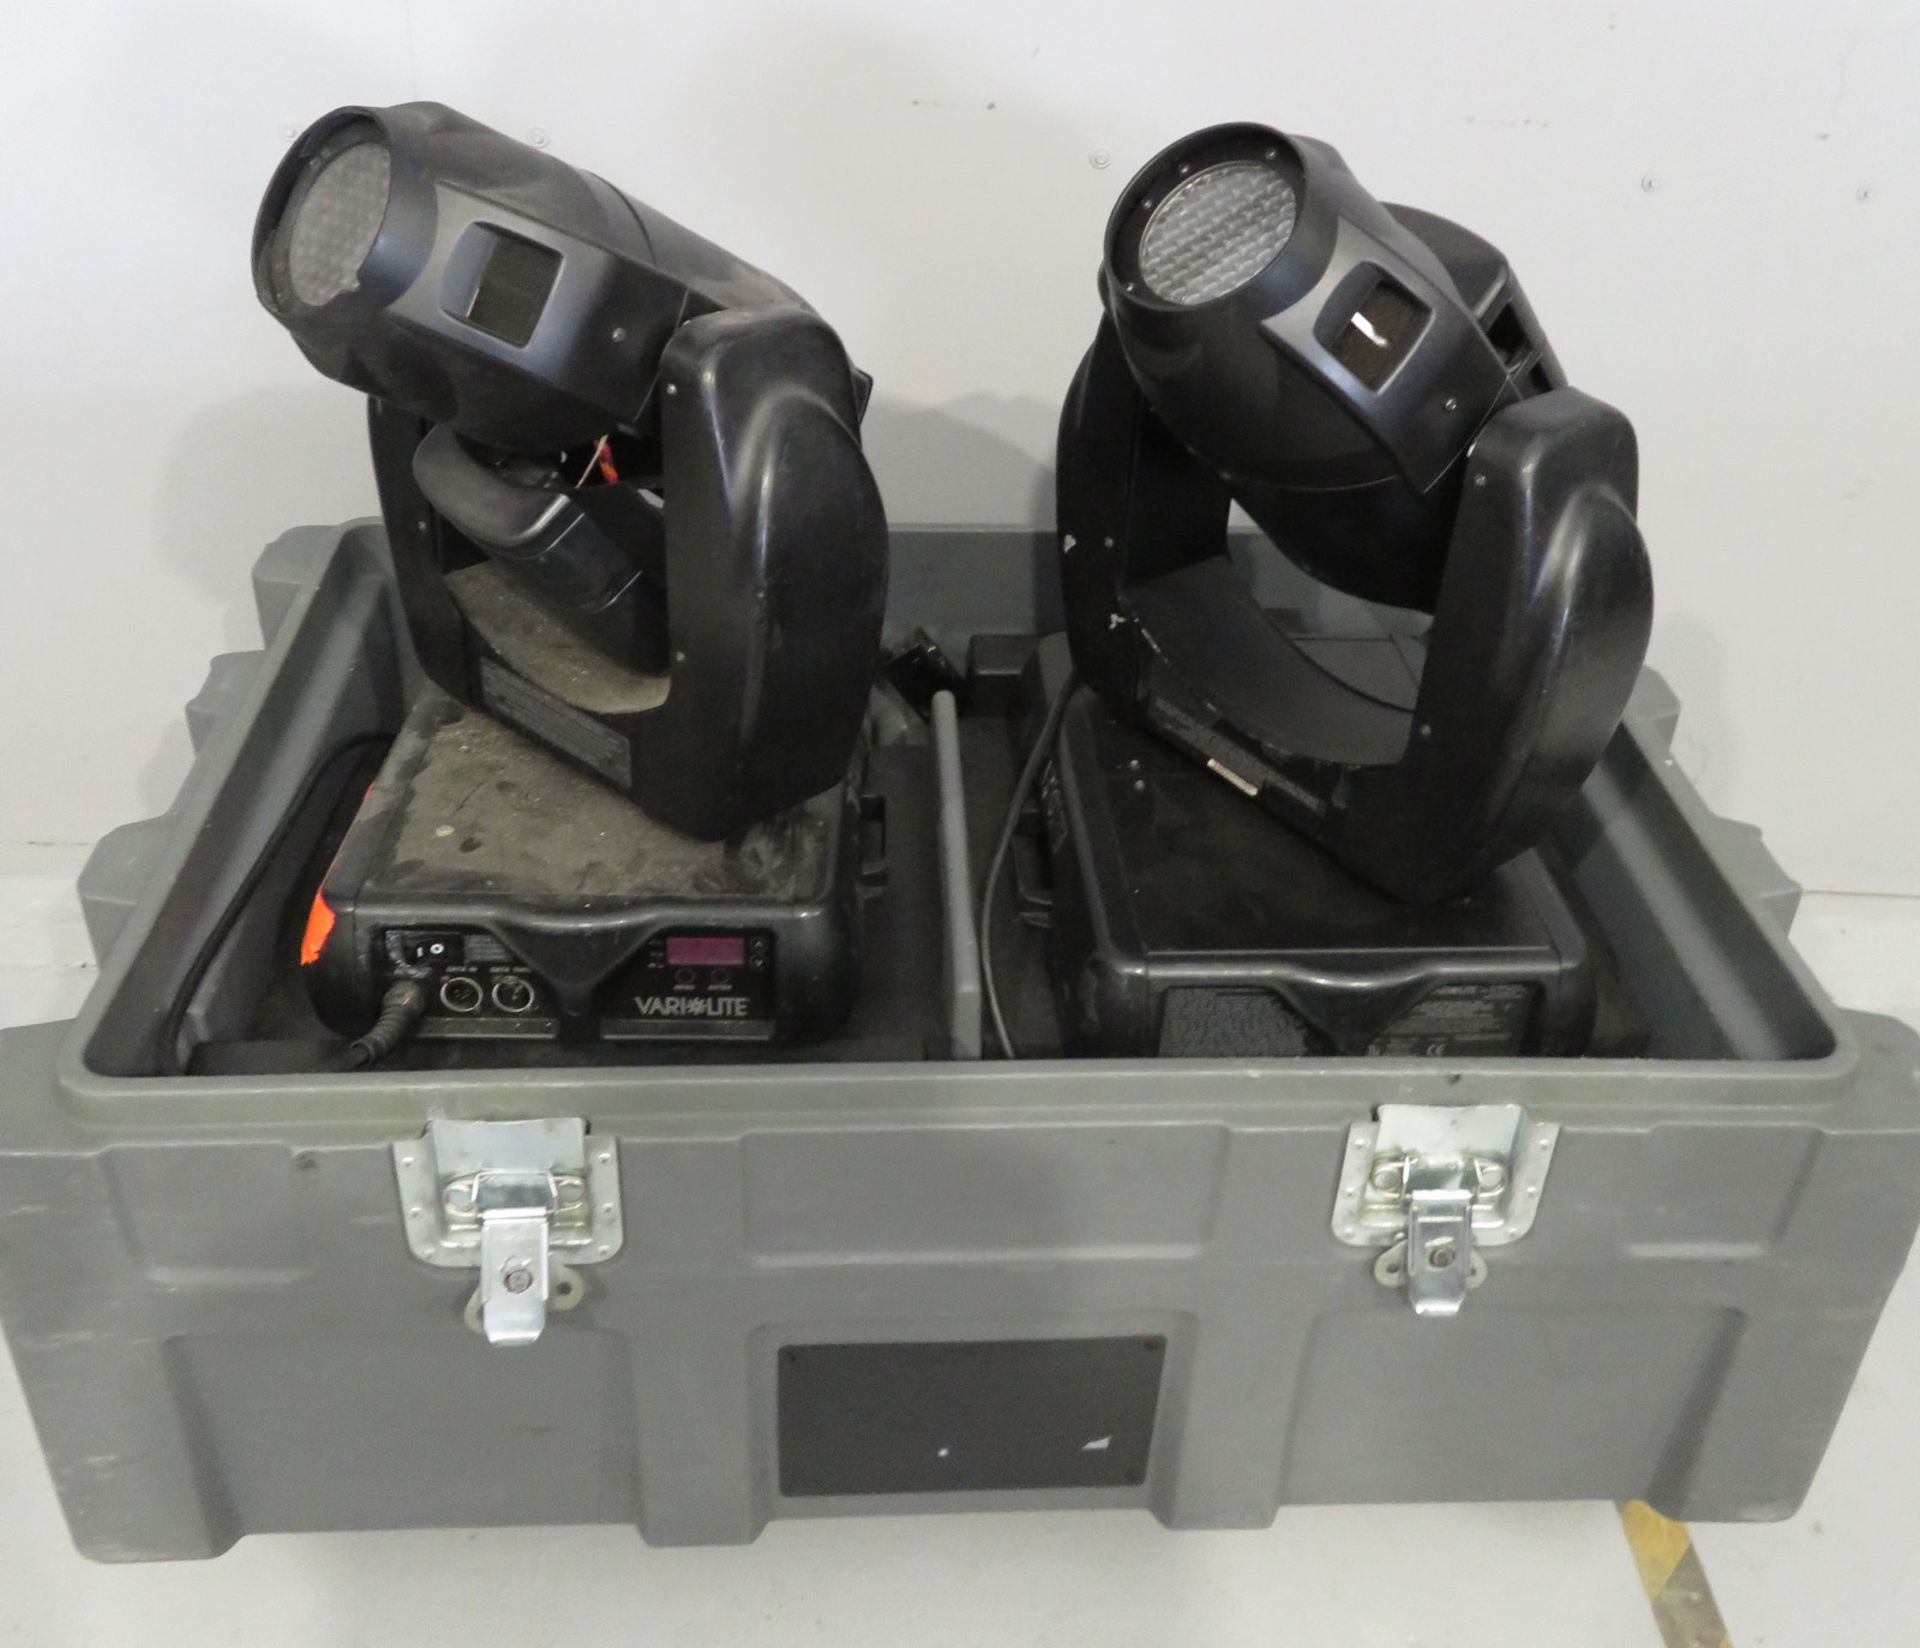 Pair of Varilite VL2402 Wash in flightcase. Includes hanging clamps and safety bonds. 1 Wo